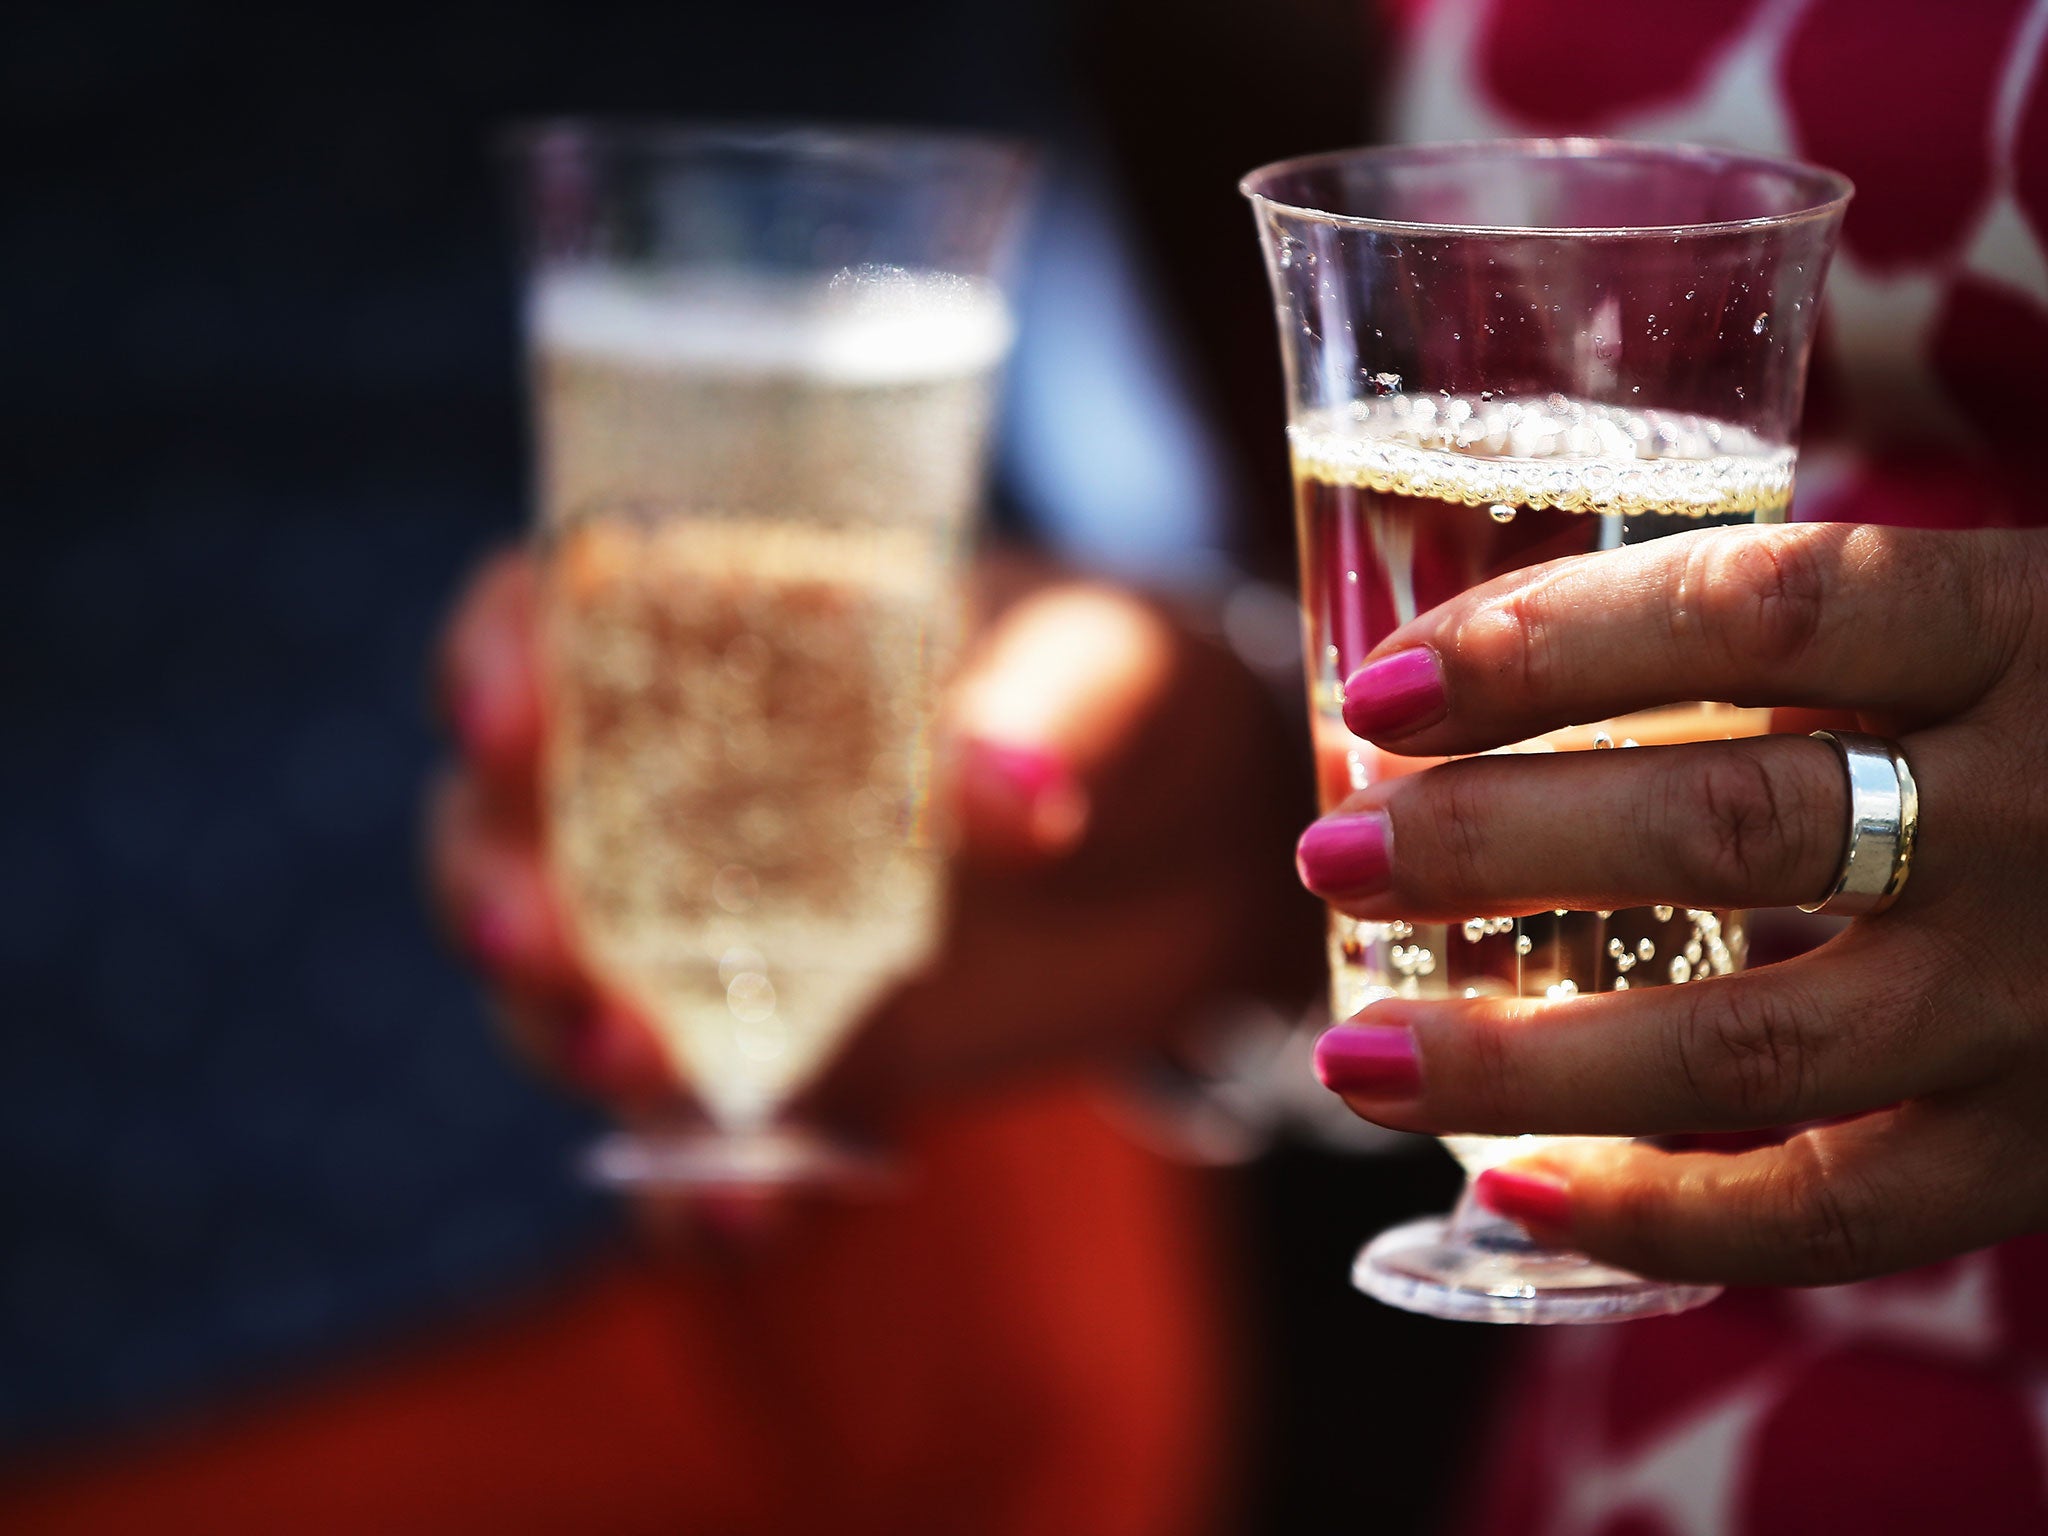 Educated British women drink more than their less educated peers